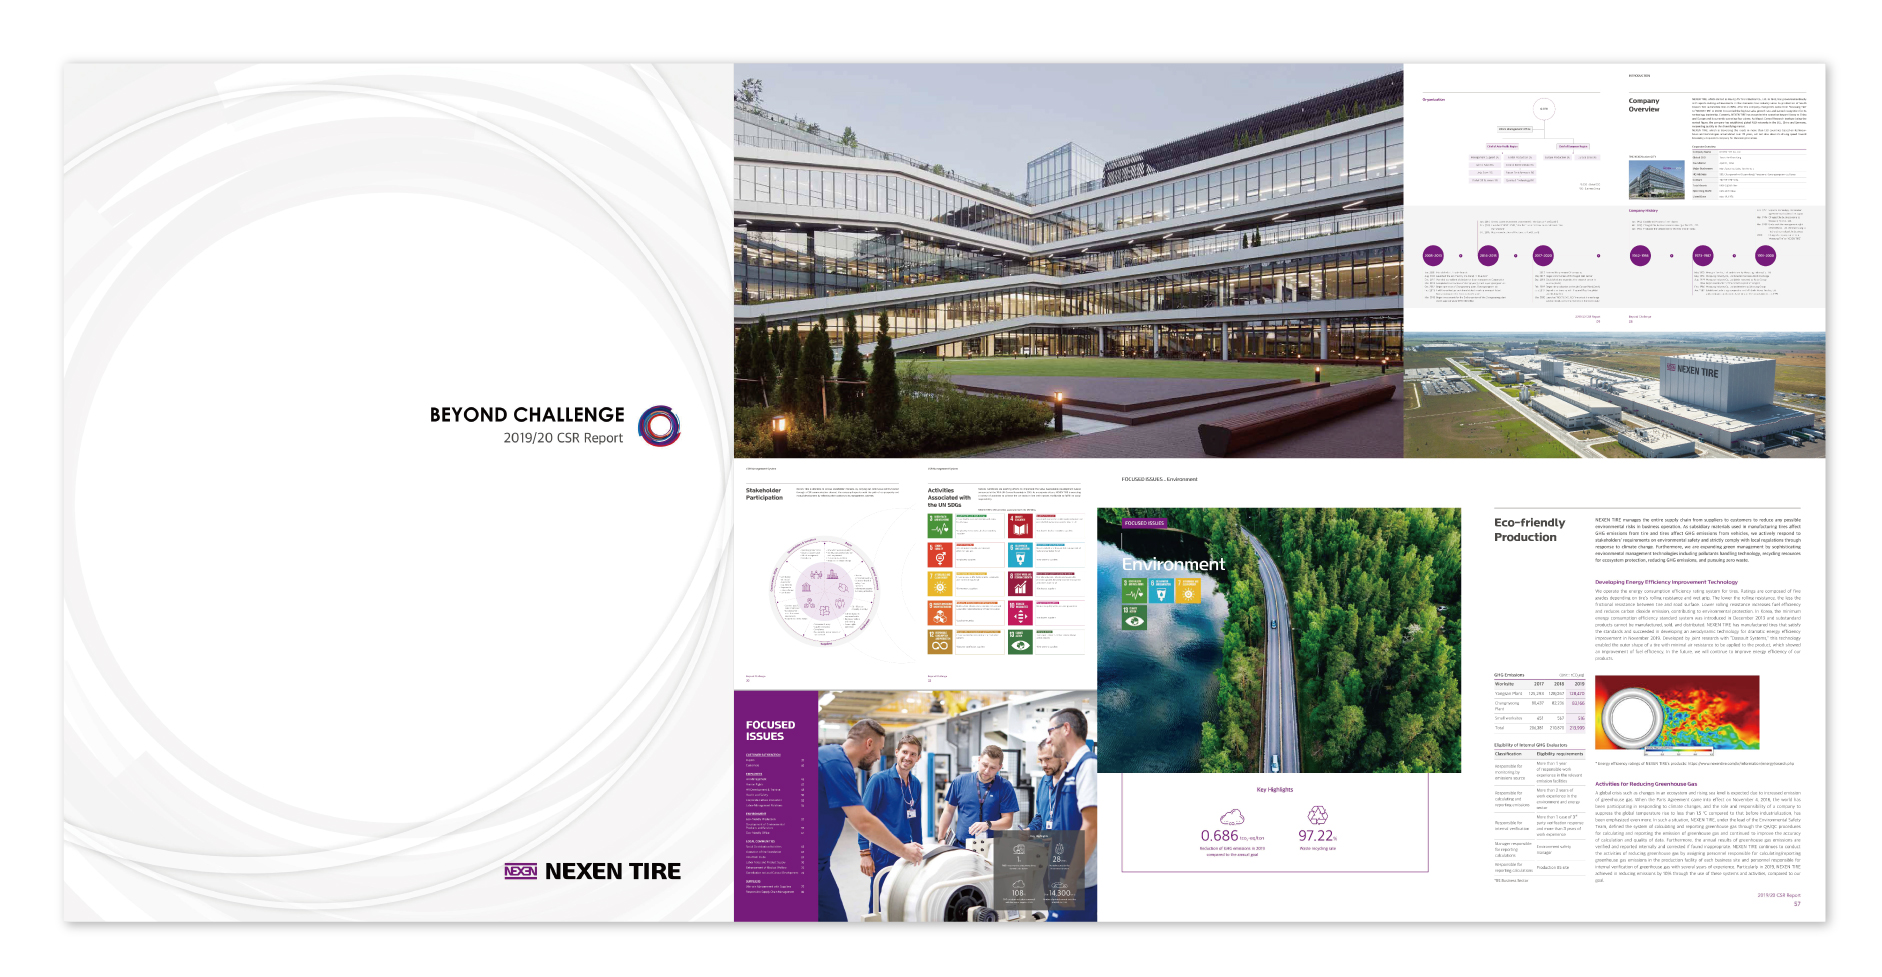 Nexen publishes first sustainability report